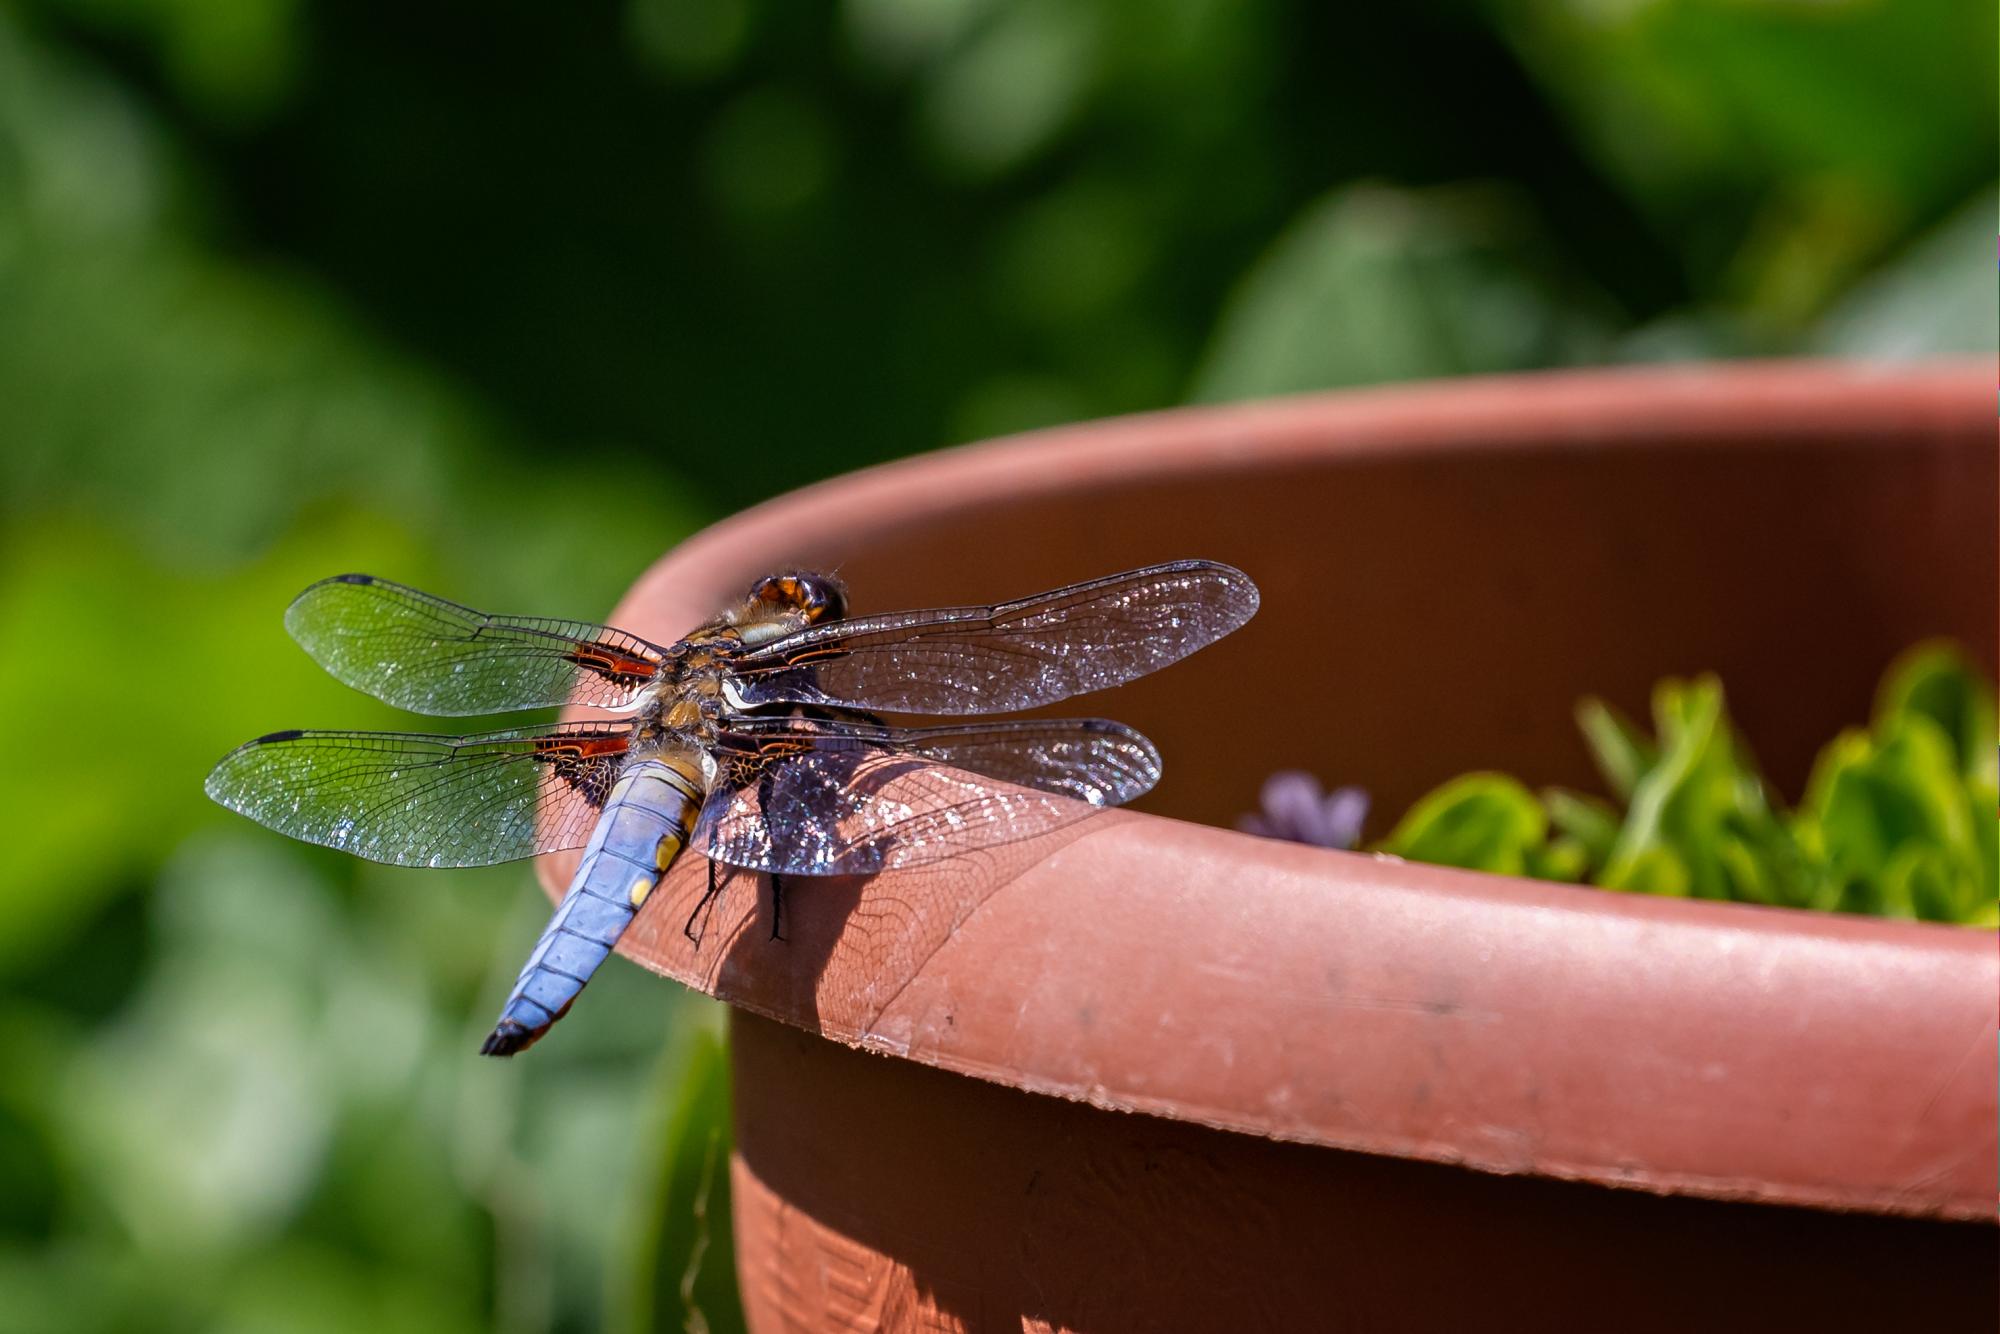 Dragon fly on side of plant pot